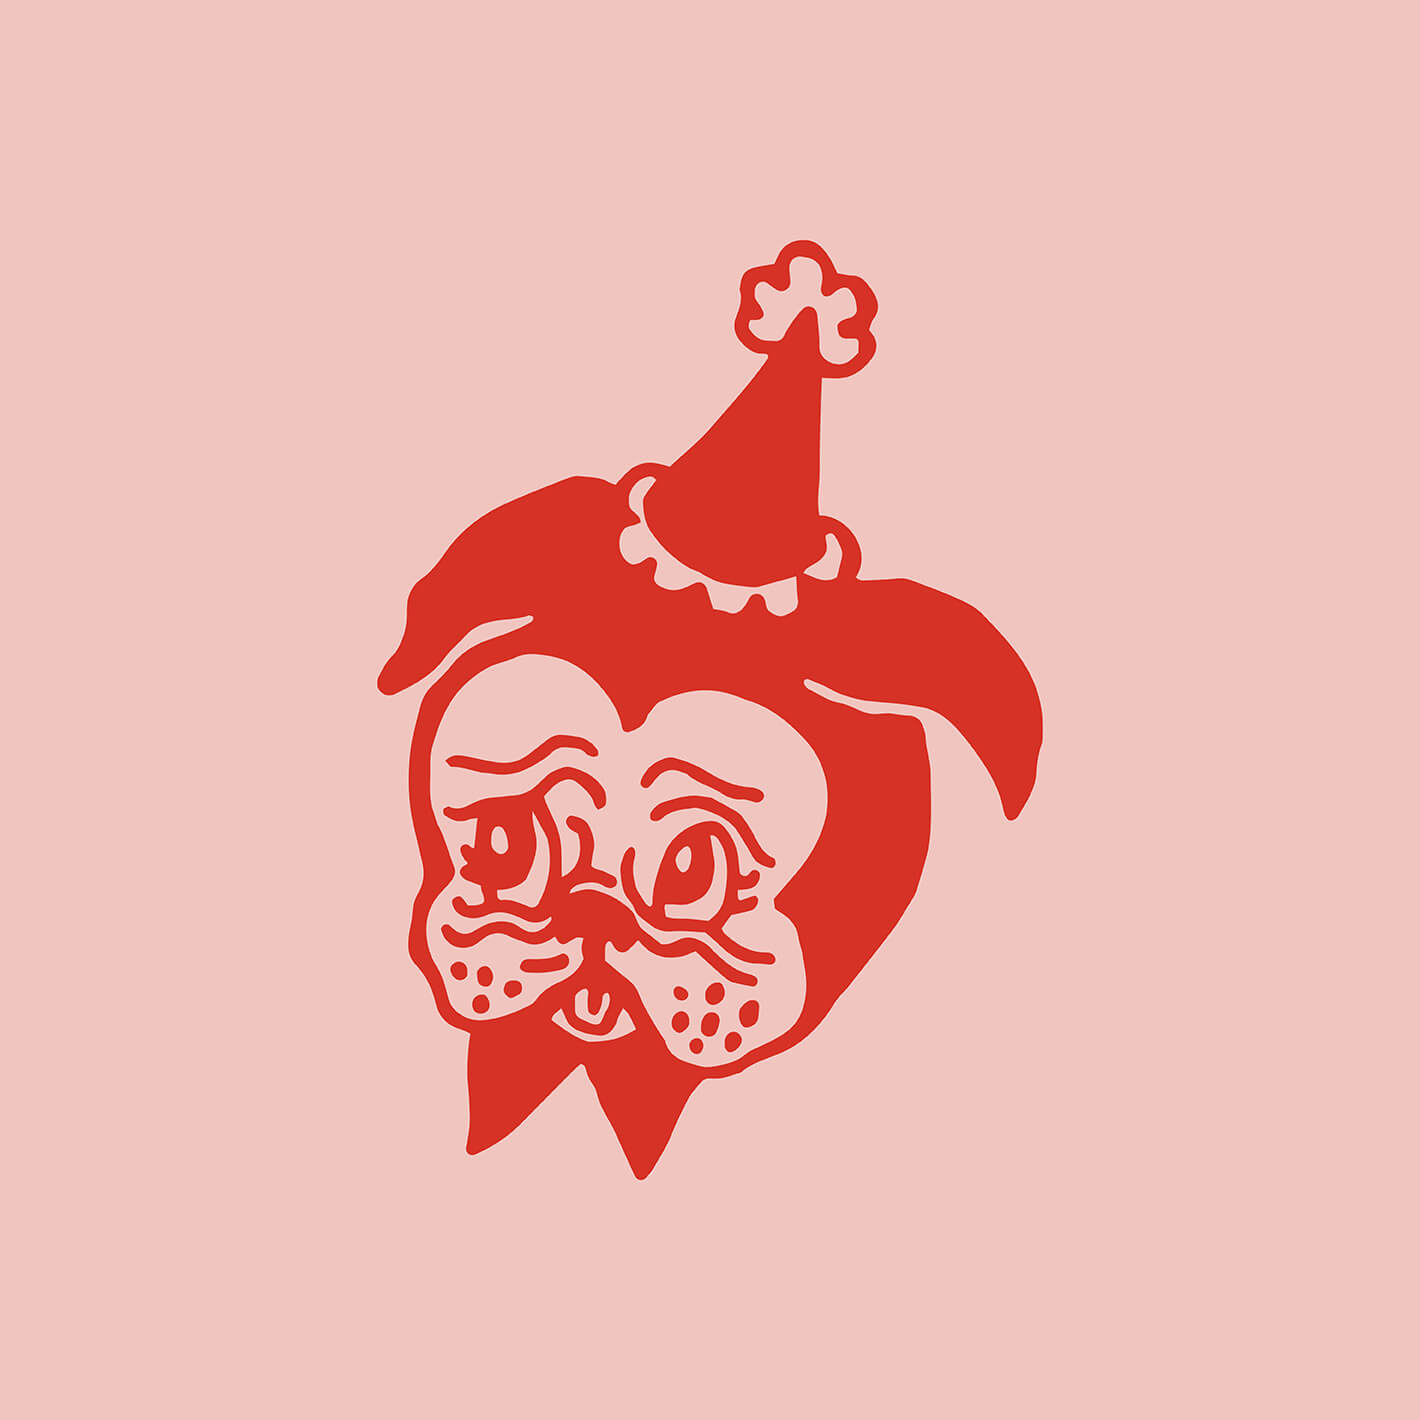 Brand design portfolio image of the Candy & Kitsch brand icon of a red pug in a party hat on a pink background.